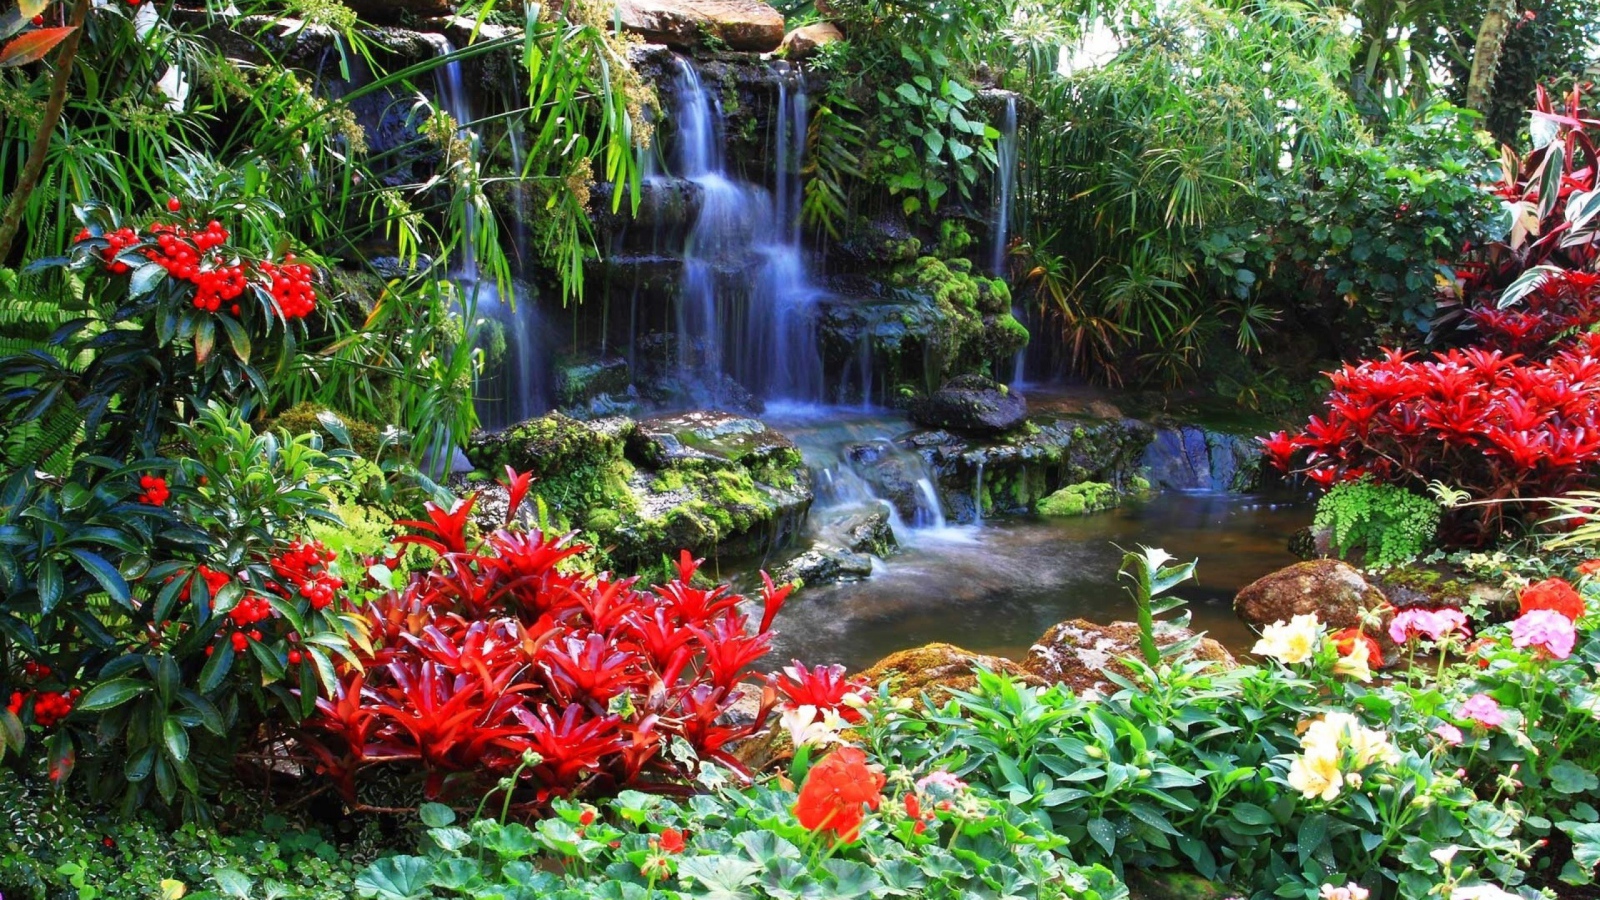 Red flowers at the waterfall